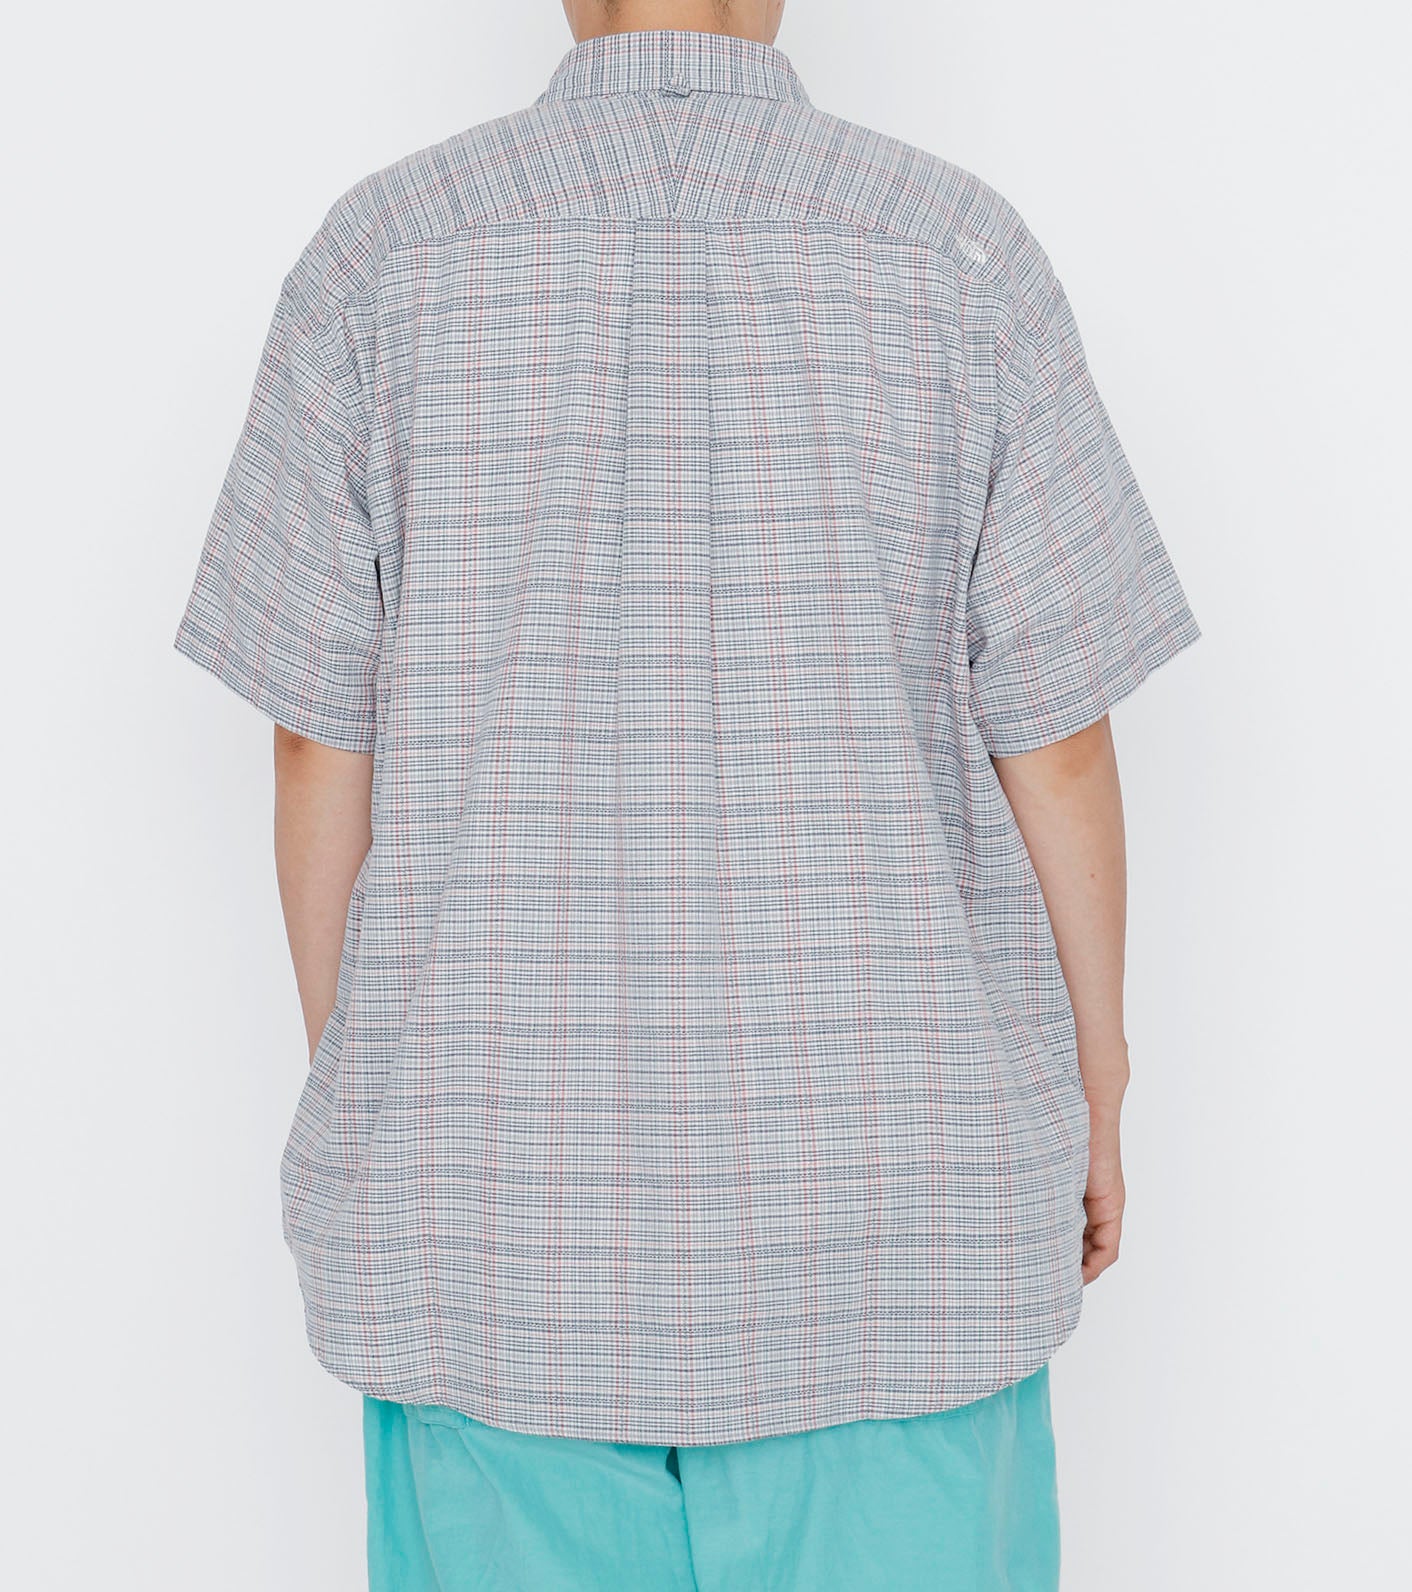 THE NORTH FACE PURPLE LABEL Plaid Dobby Field S/S Shirt